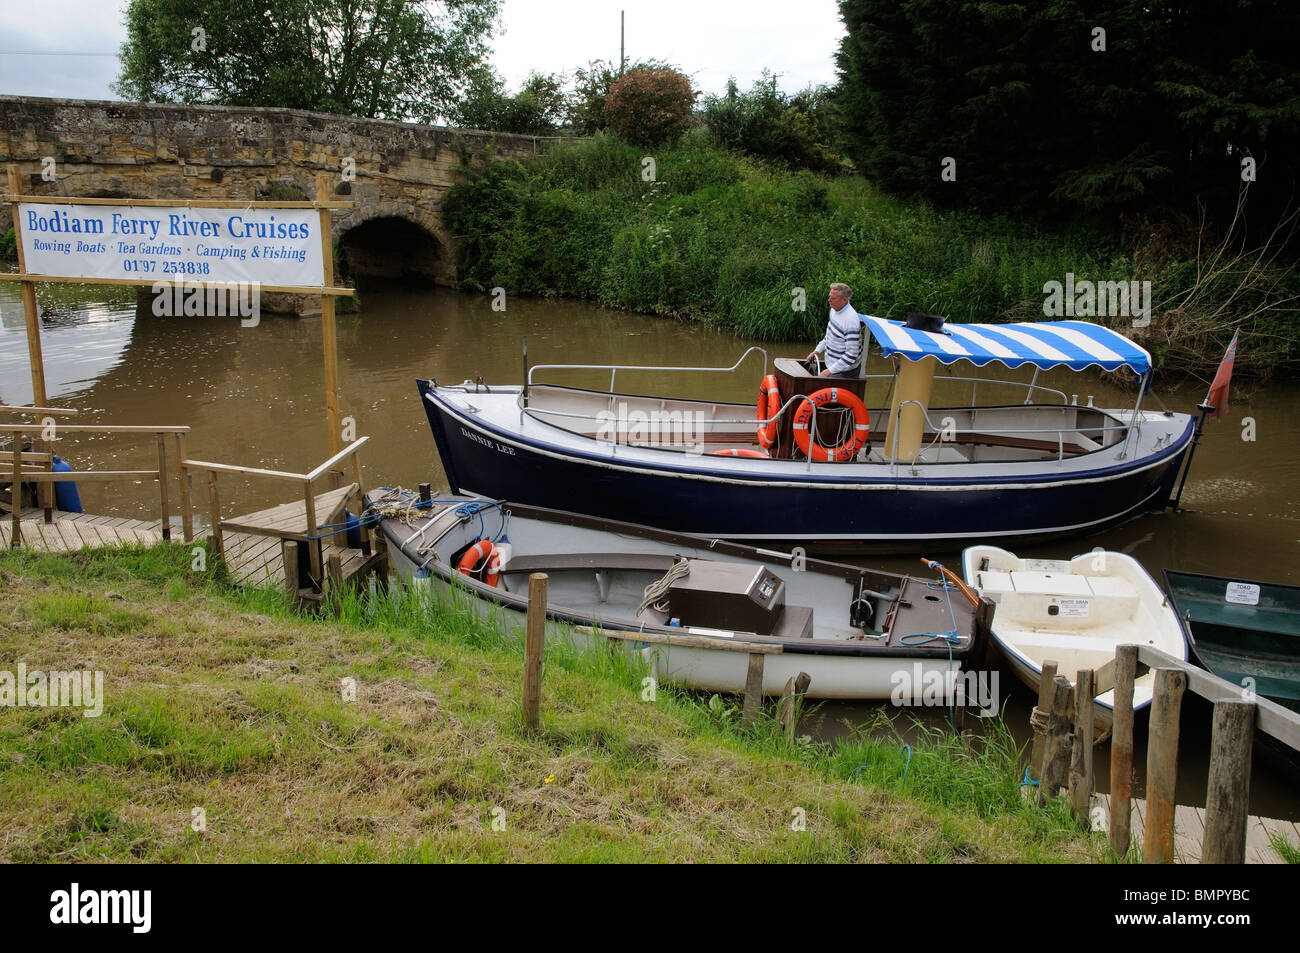 Hire boats alongside on the River Rother & the Bodiam passenger ferry at Newenden Cranbrook Kent England UK Stock Photo